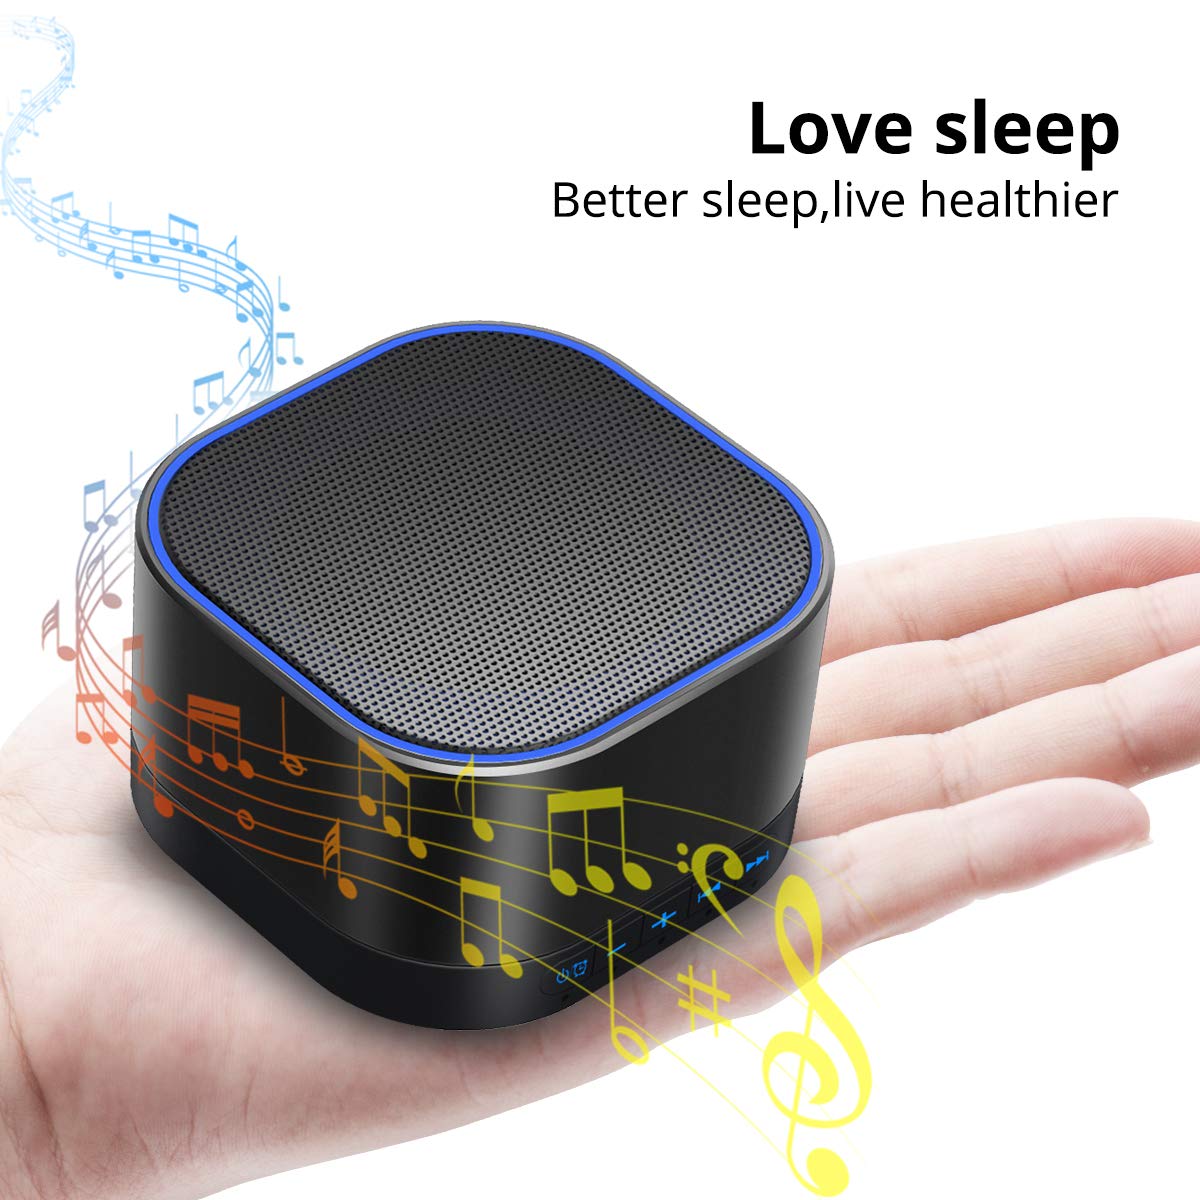 Magicteam Sound Machine White Noise Machine with 20 Non Looping Natural Soothing Sounds Memory Function 32 Levels of Volume Powered by AC or USB and Sleep Sound Timer Therapy for Baby Kids Adults